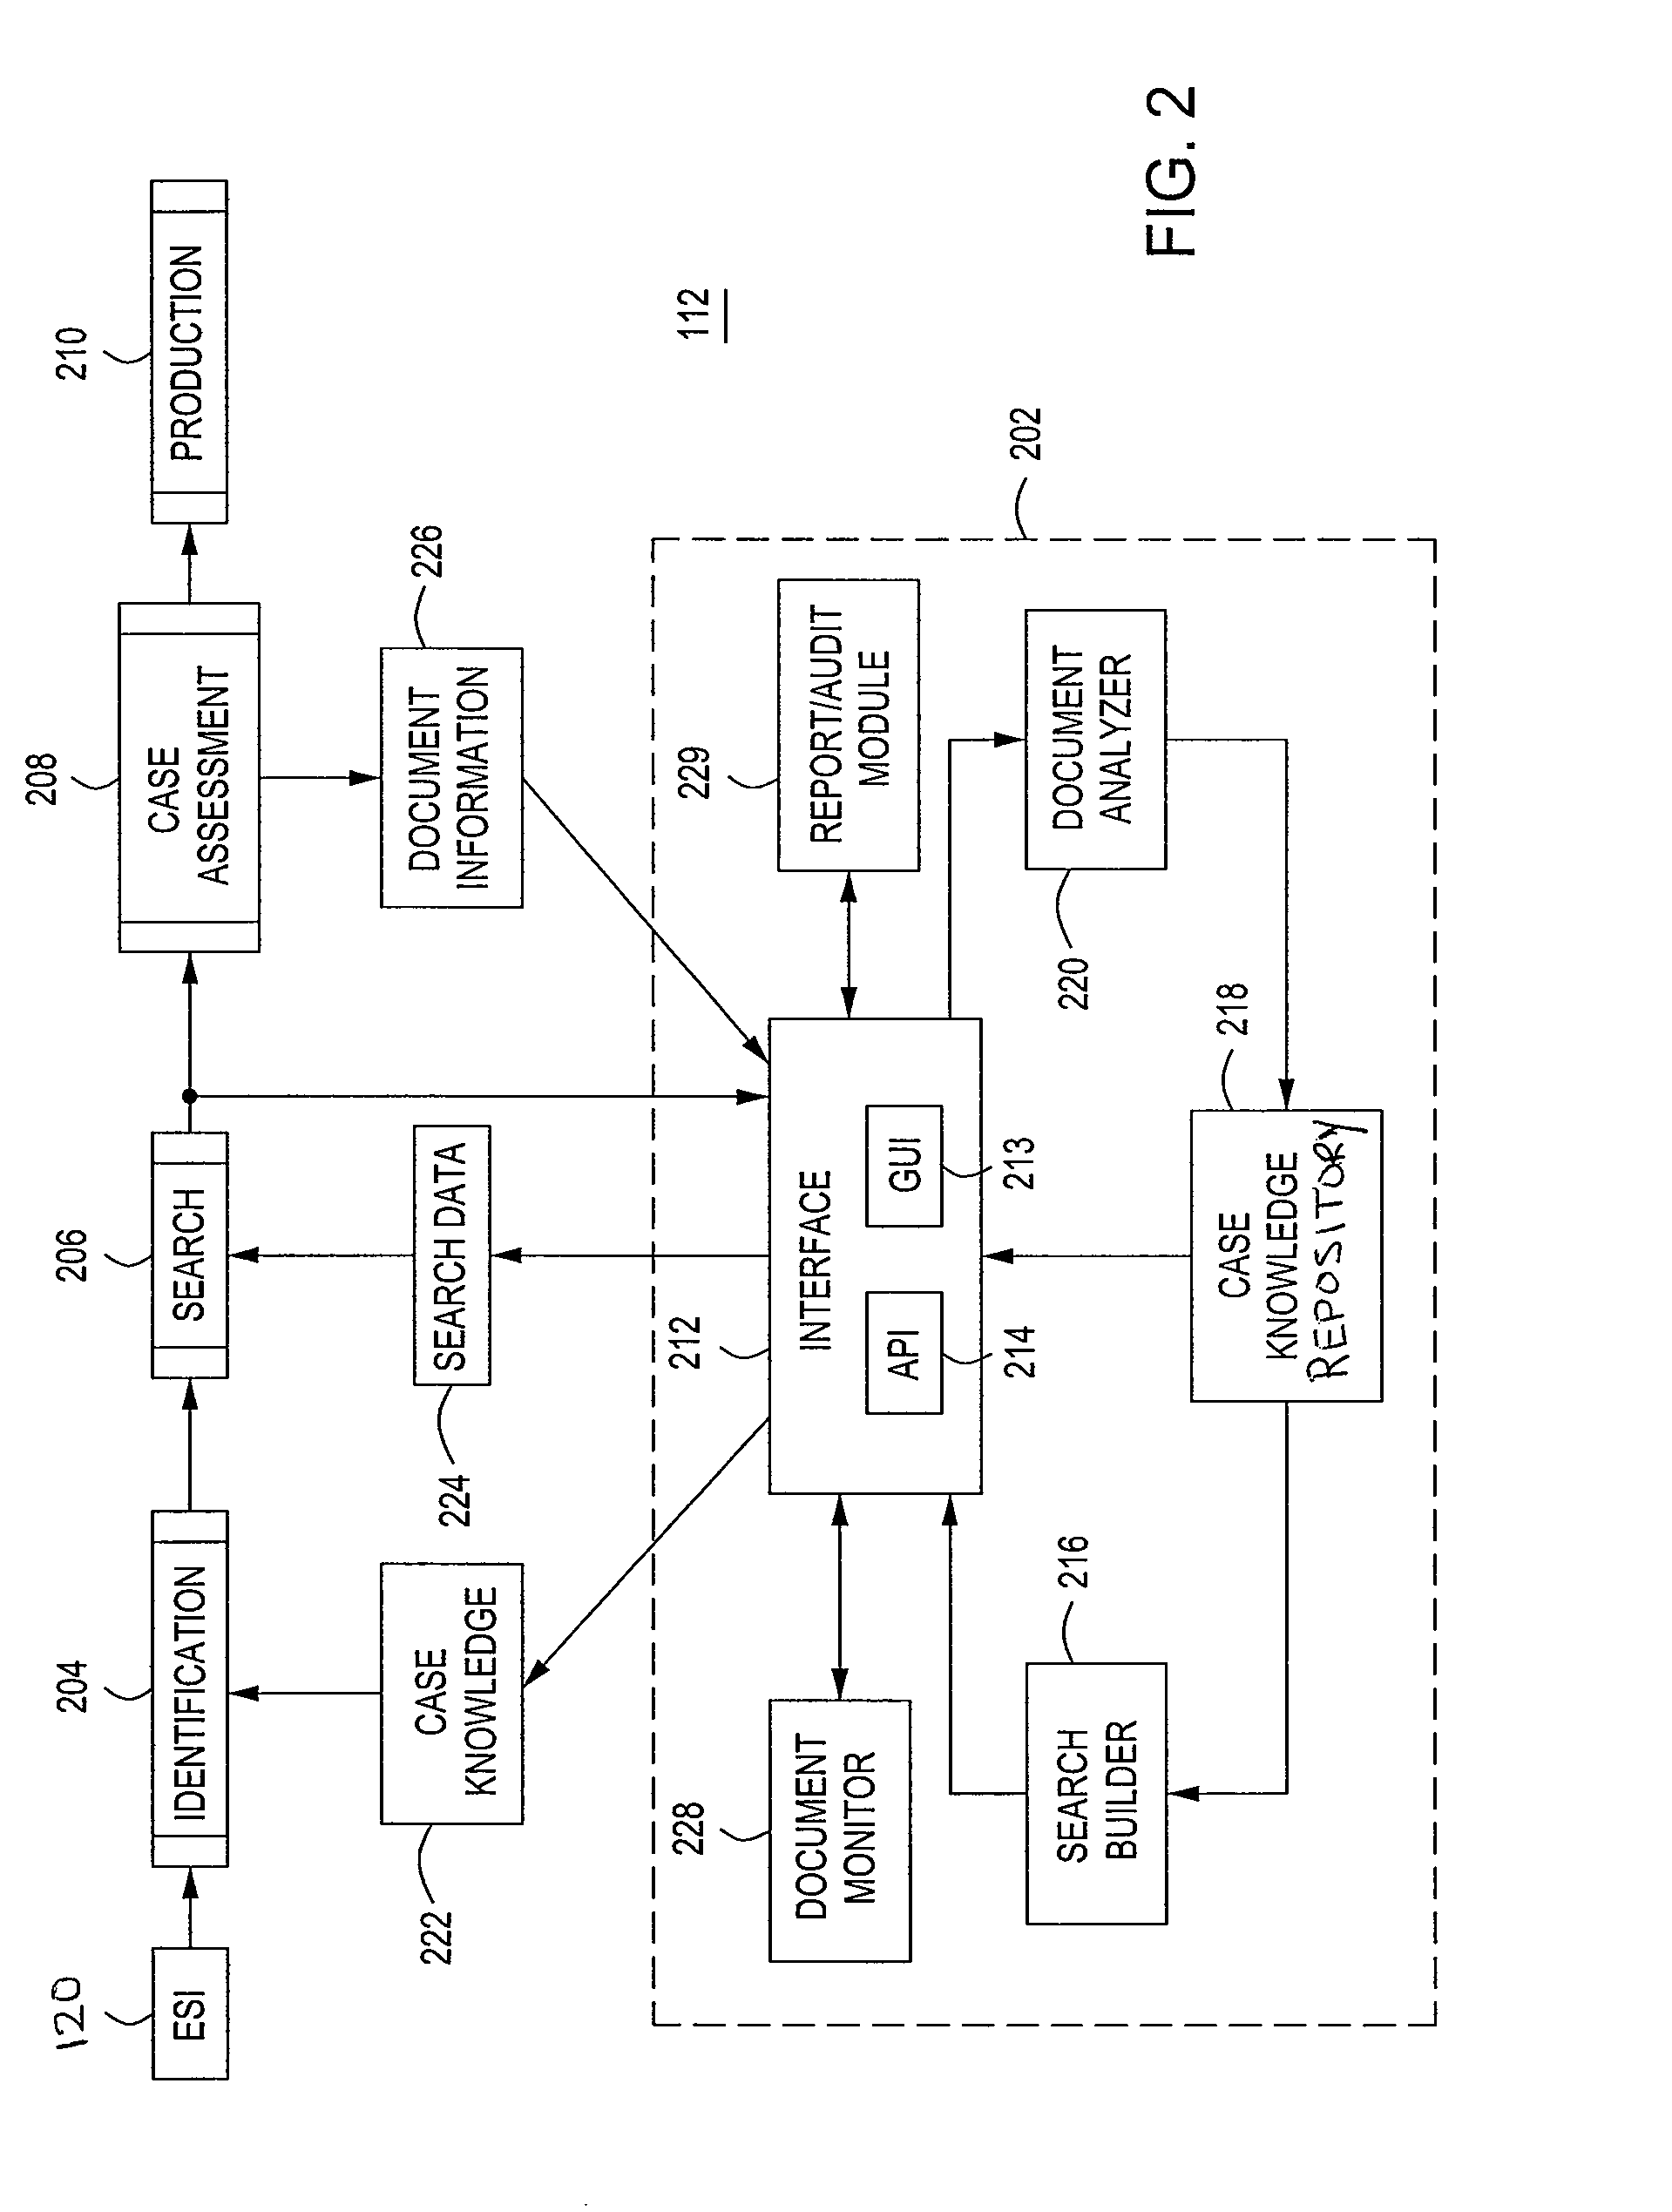 Method and apparatus for processing electronically stored information for electronic discovery